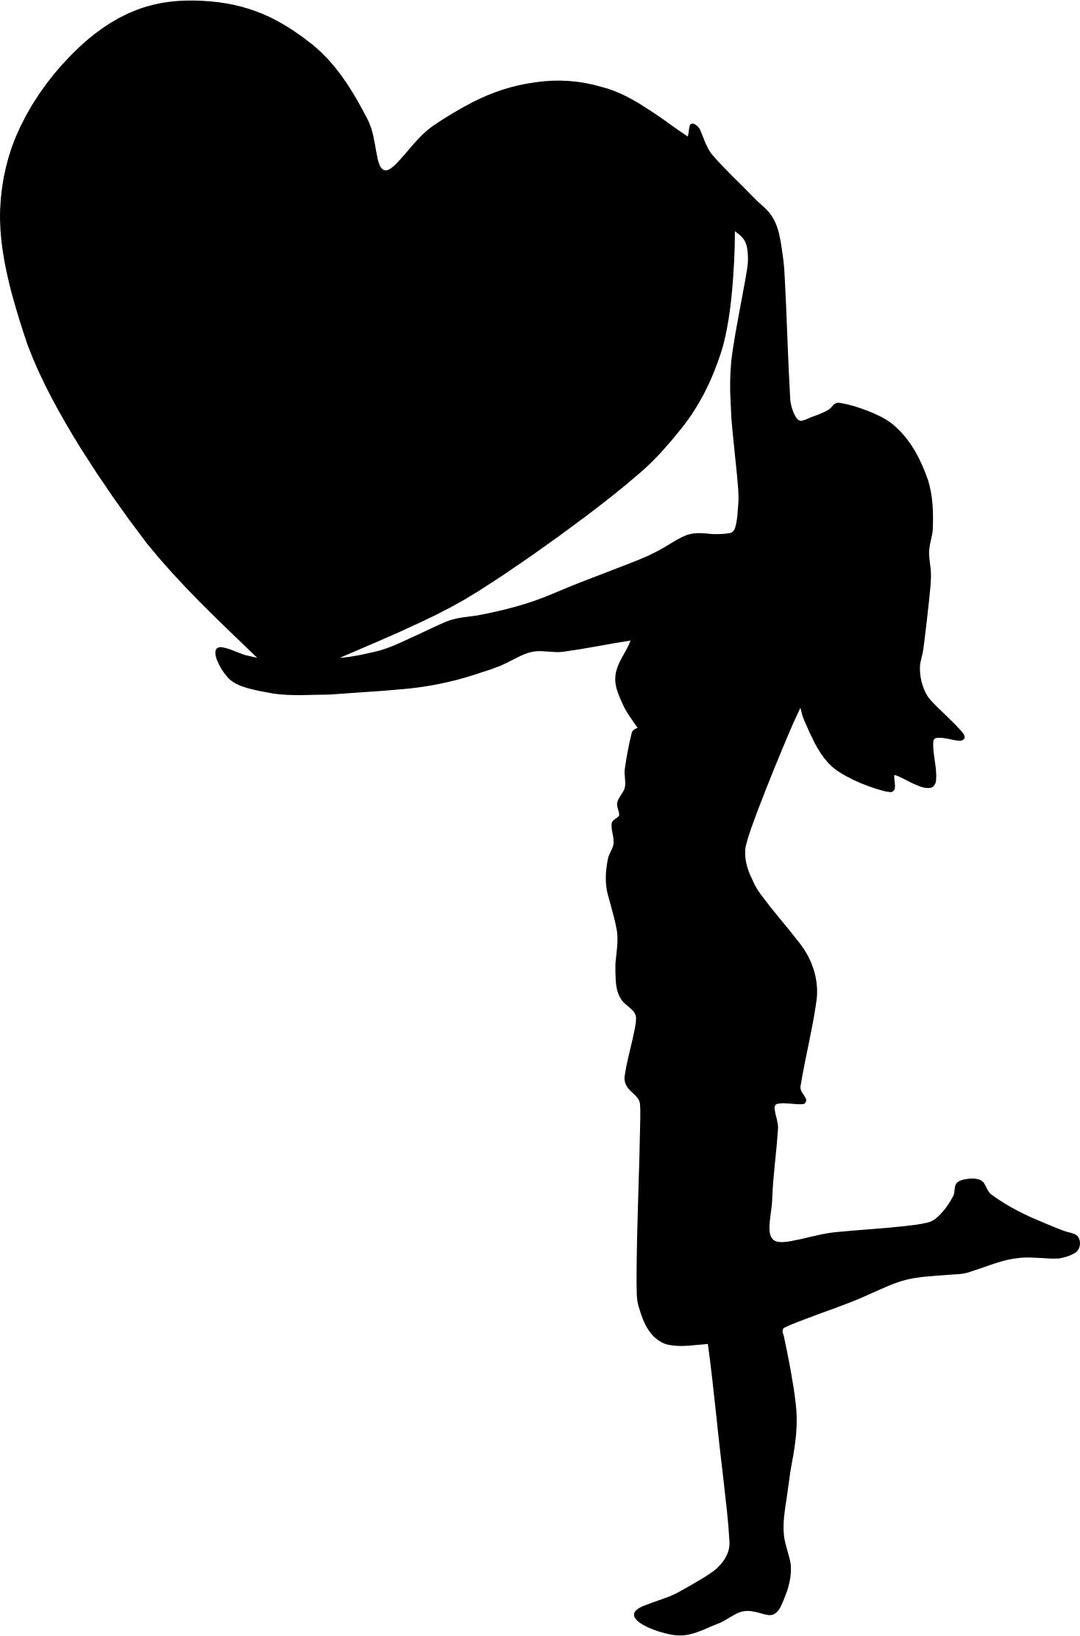 Woman With Big Heart Silhouette png transparent